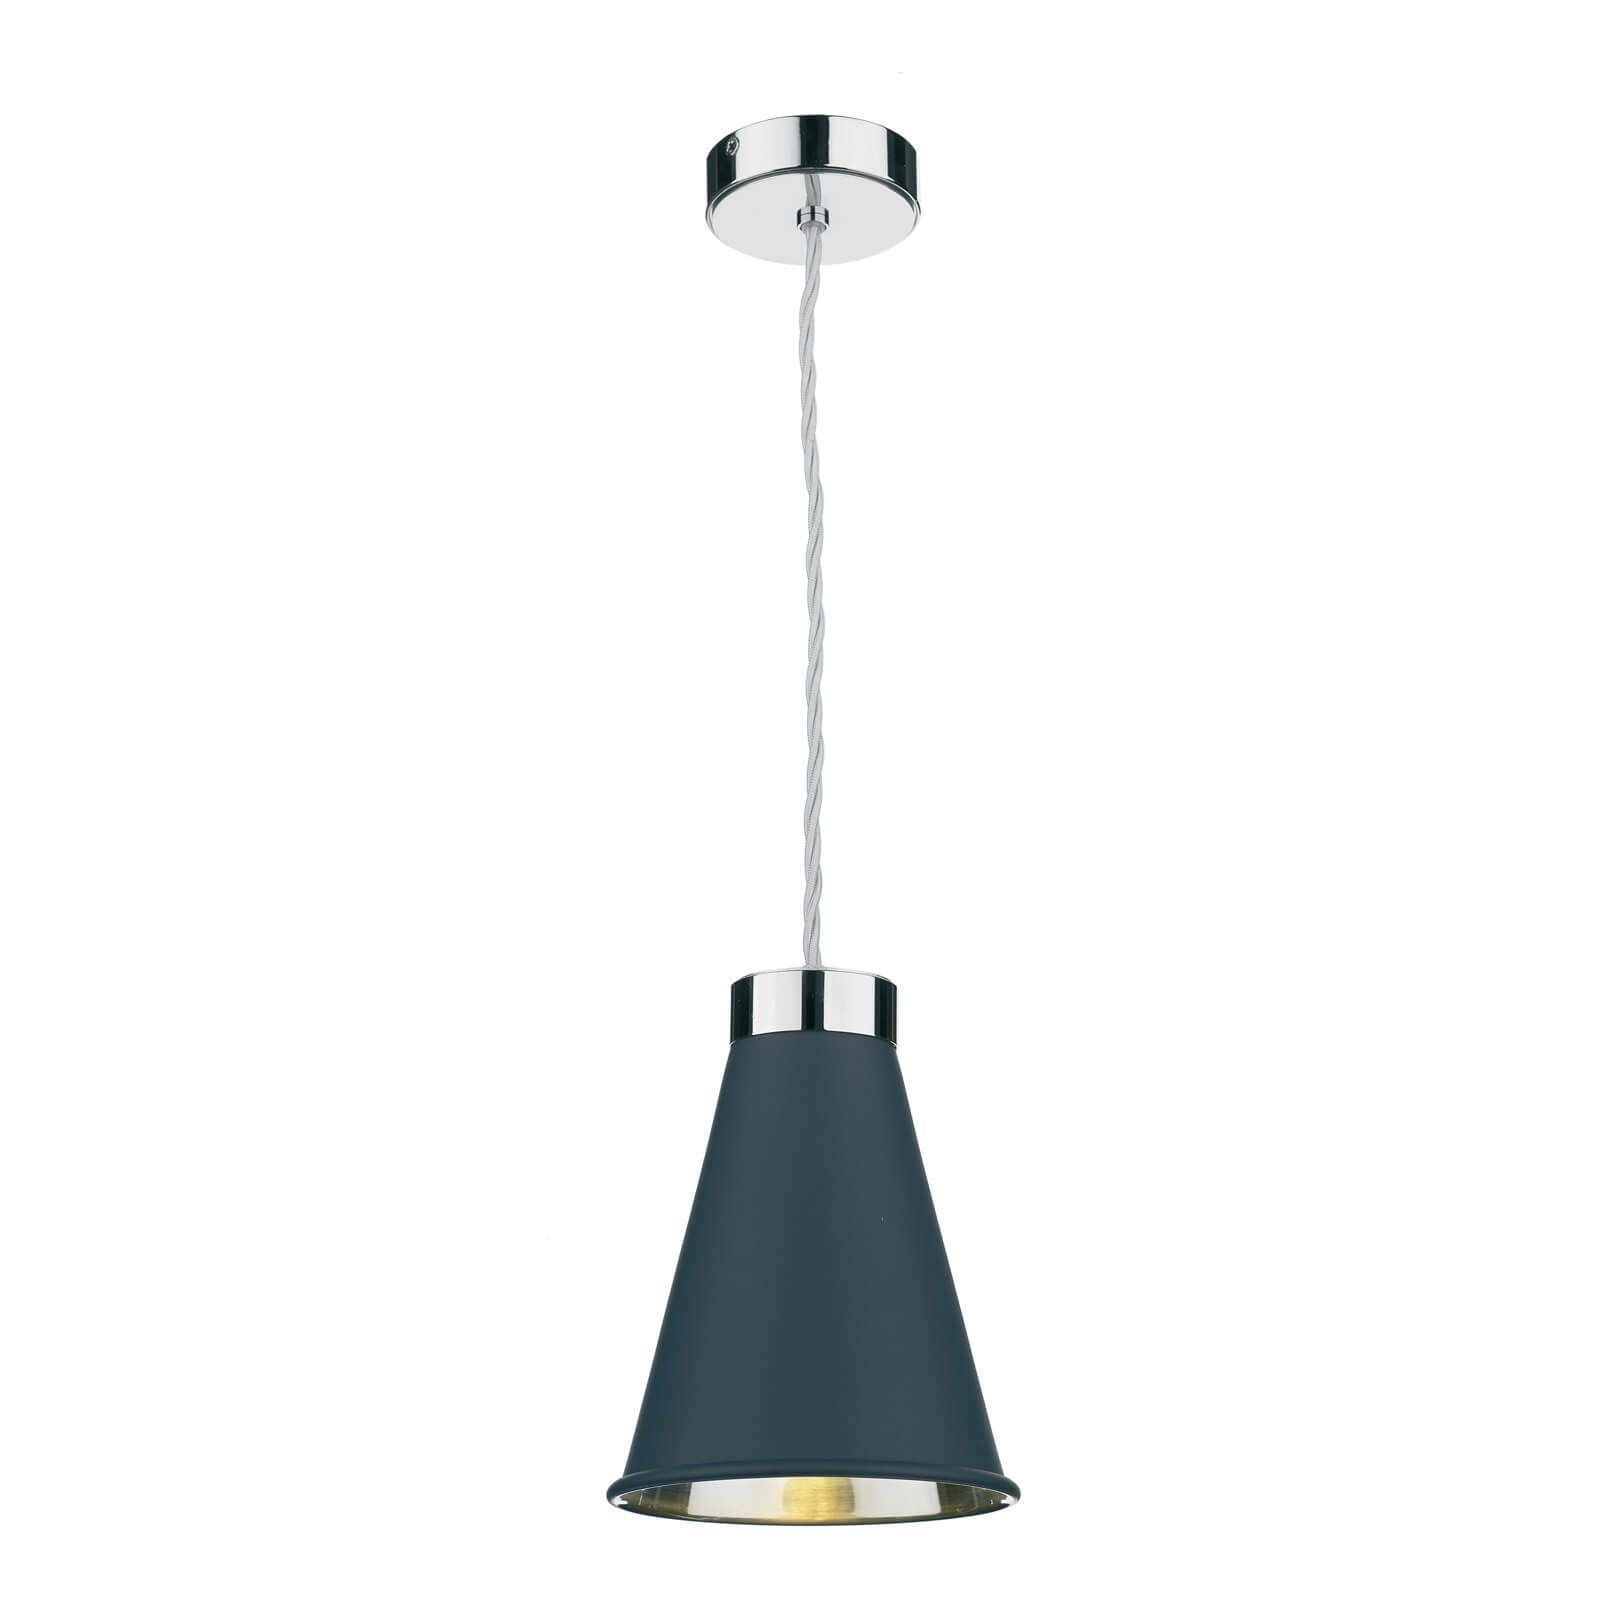 Hyde 1 Light Small/Large Pendant Complete with Bespoke Metal Shade